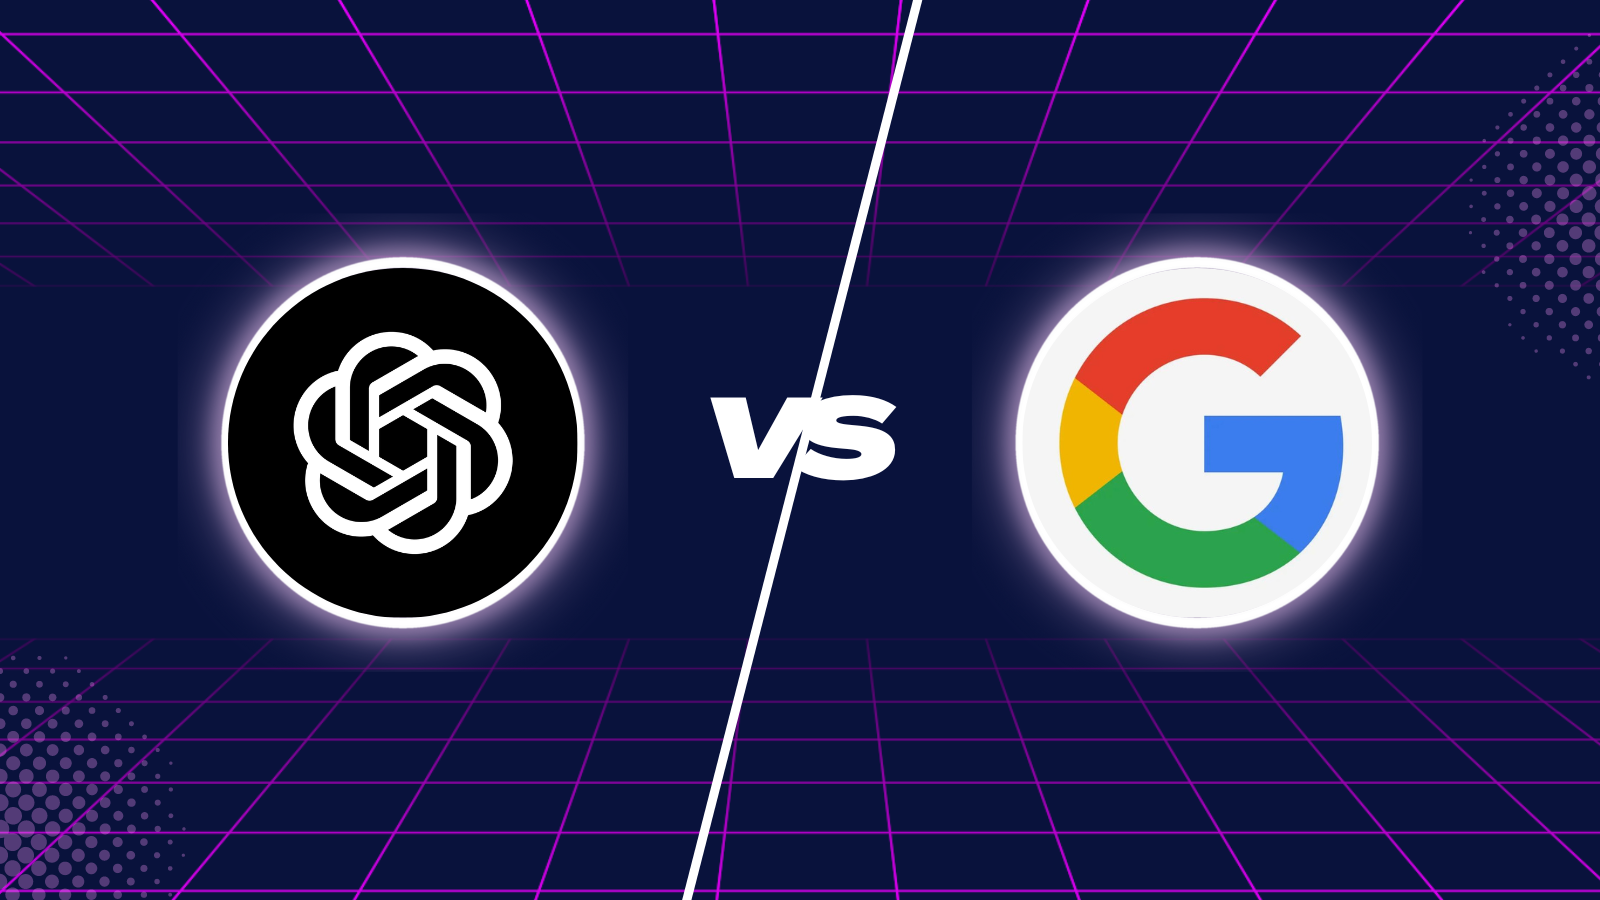 ChatGPT VS Google Search - Who Comes Out On Top?